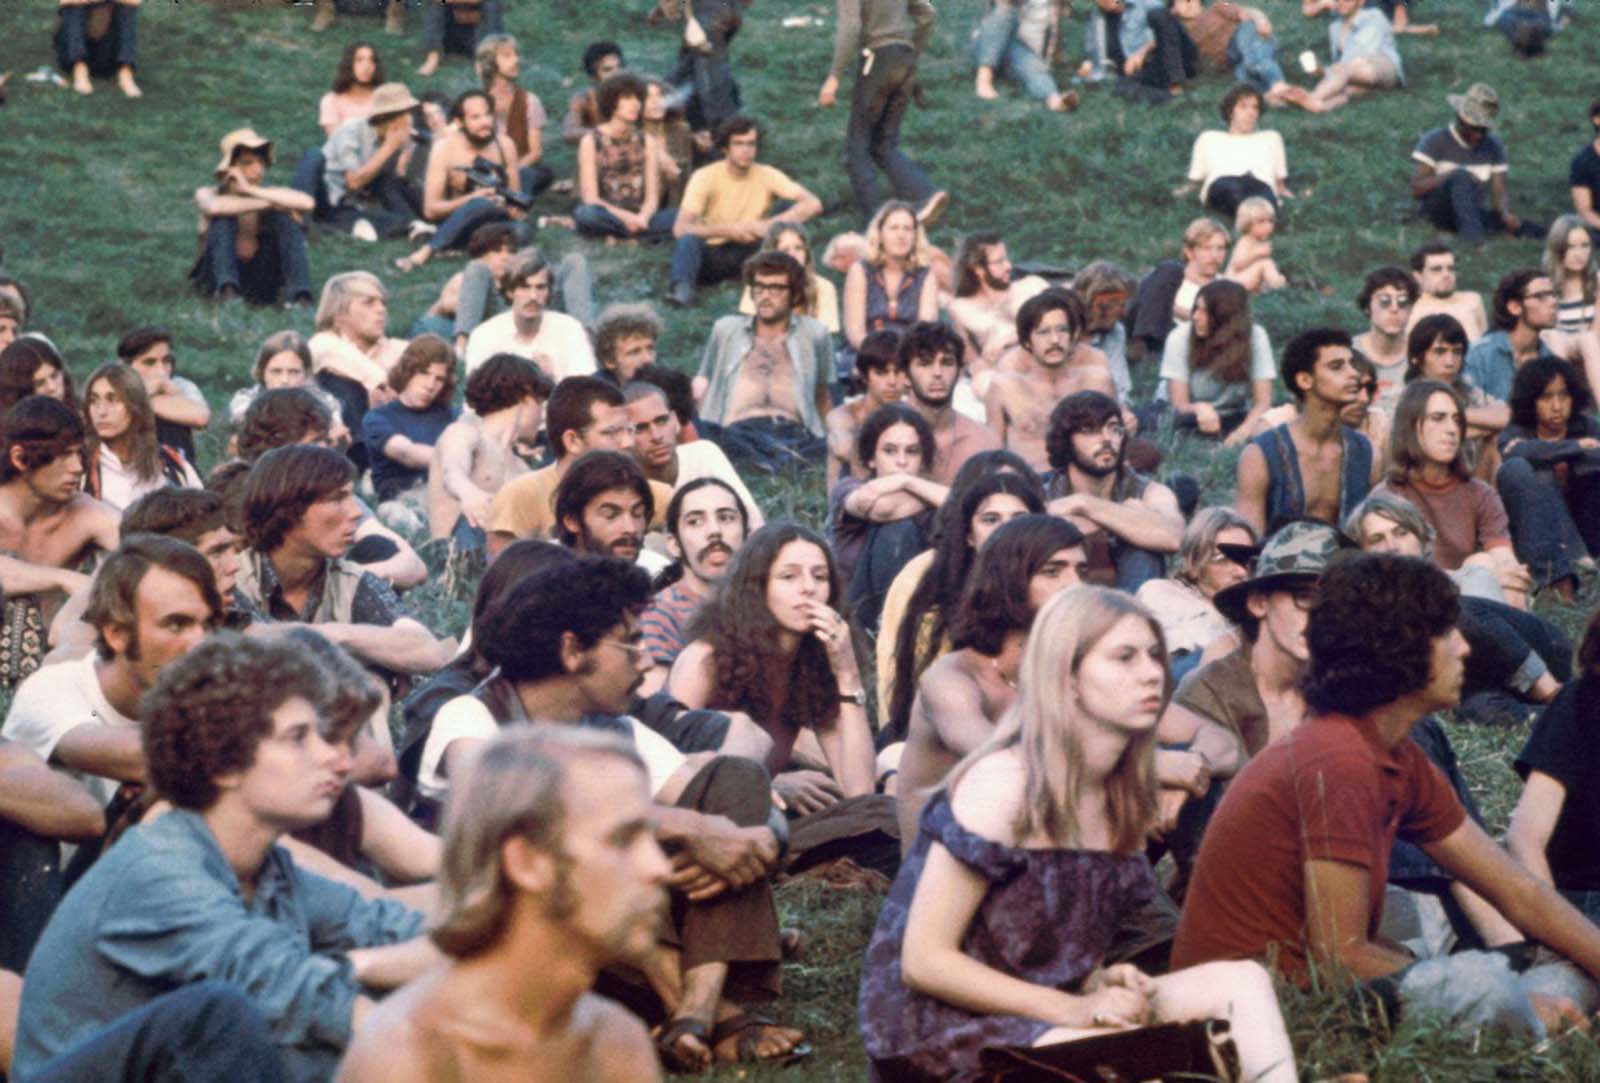 Audience members watch a performance at the Woodstock Music & Art Fair.